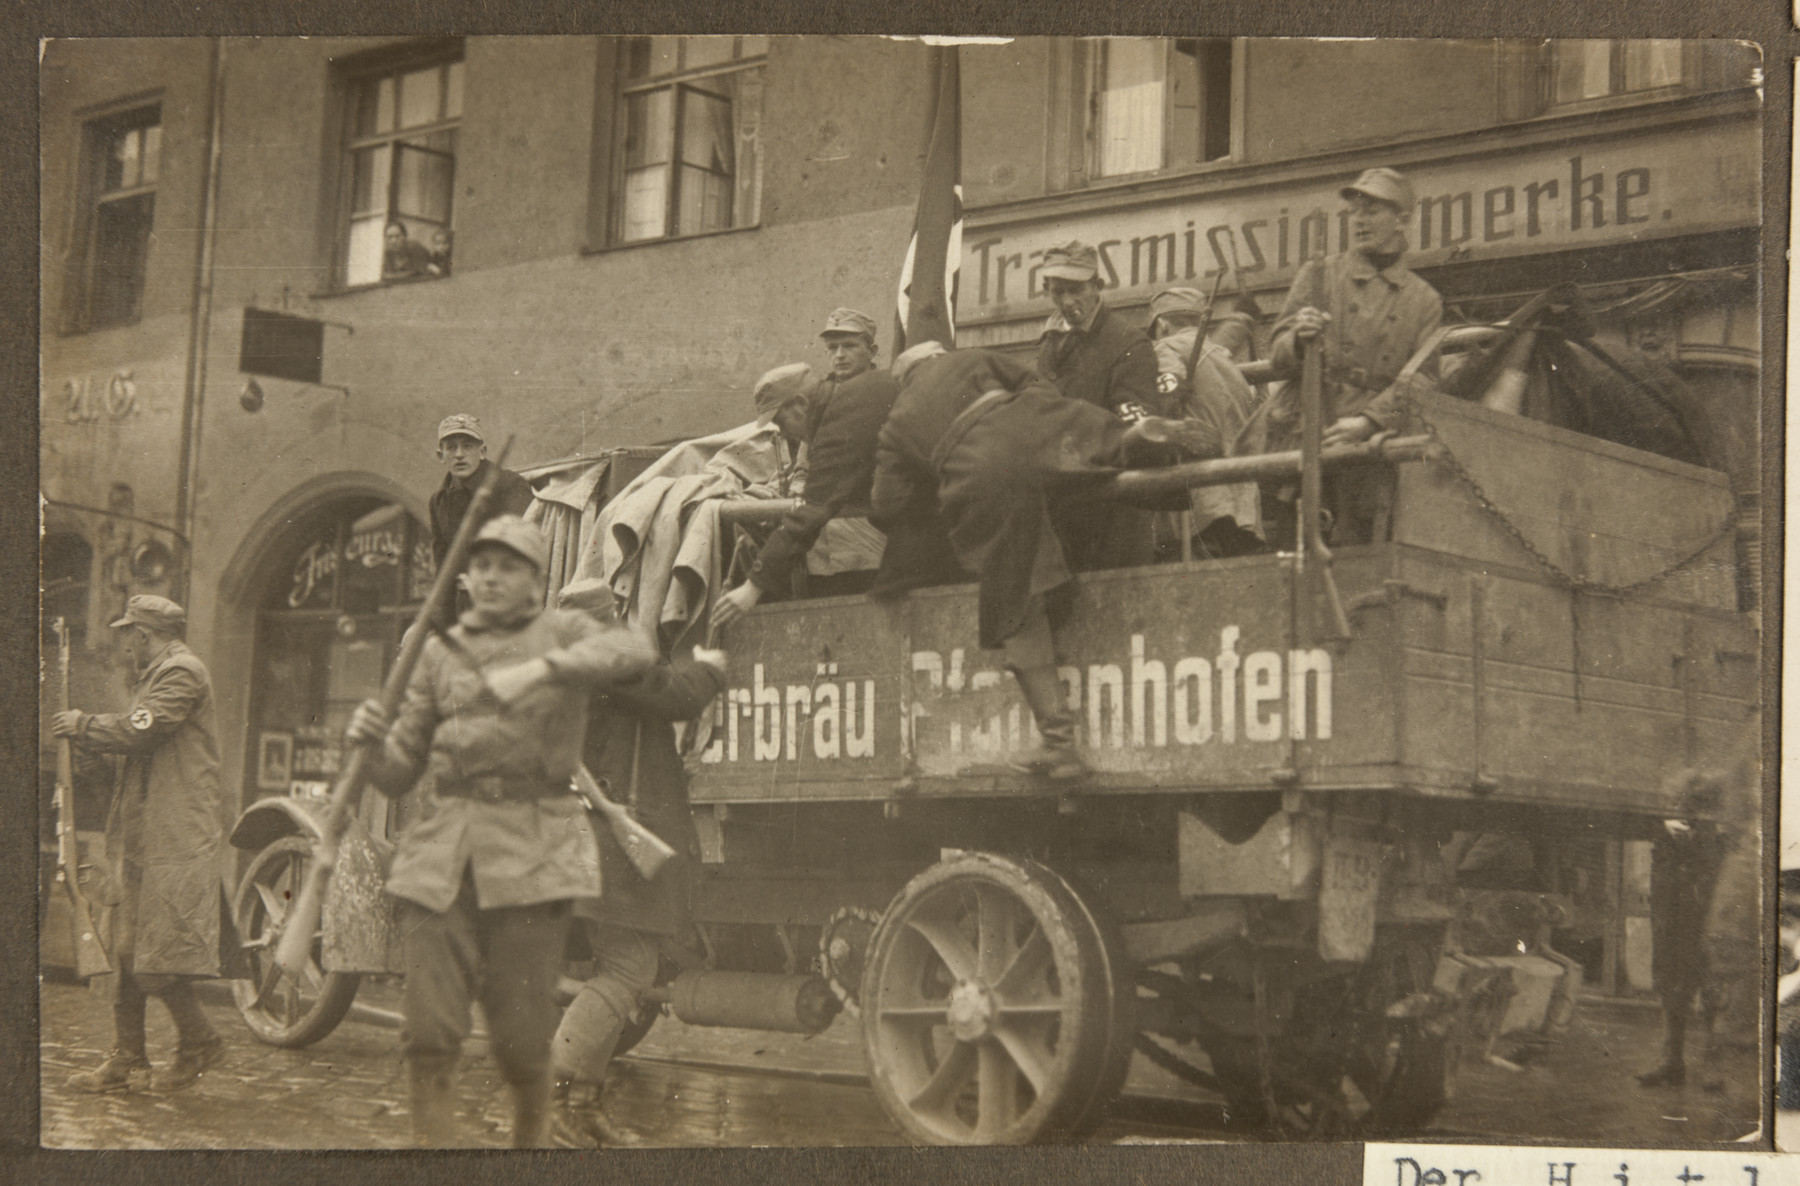 Armed SA men pile out of a truck in to a Munich street during the Beer Hall Putsch.